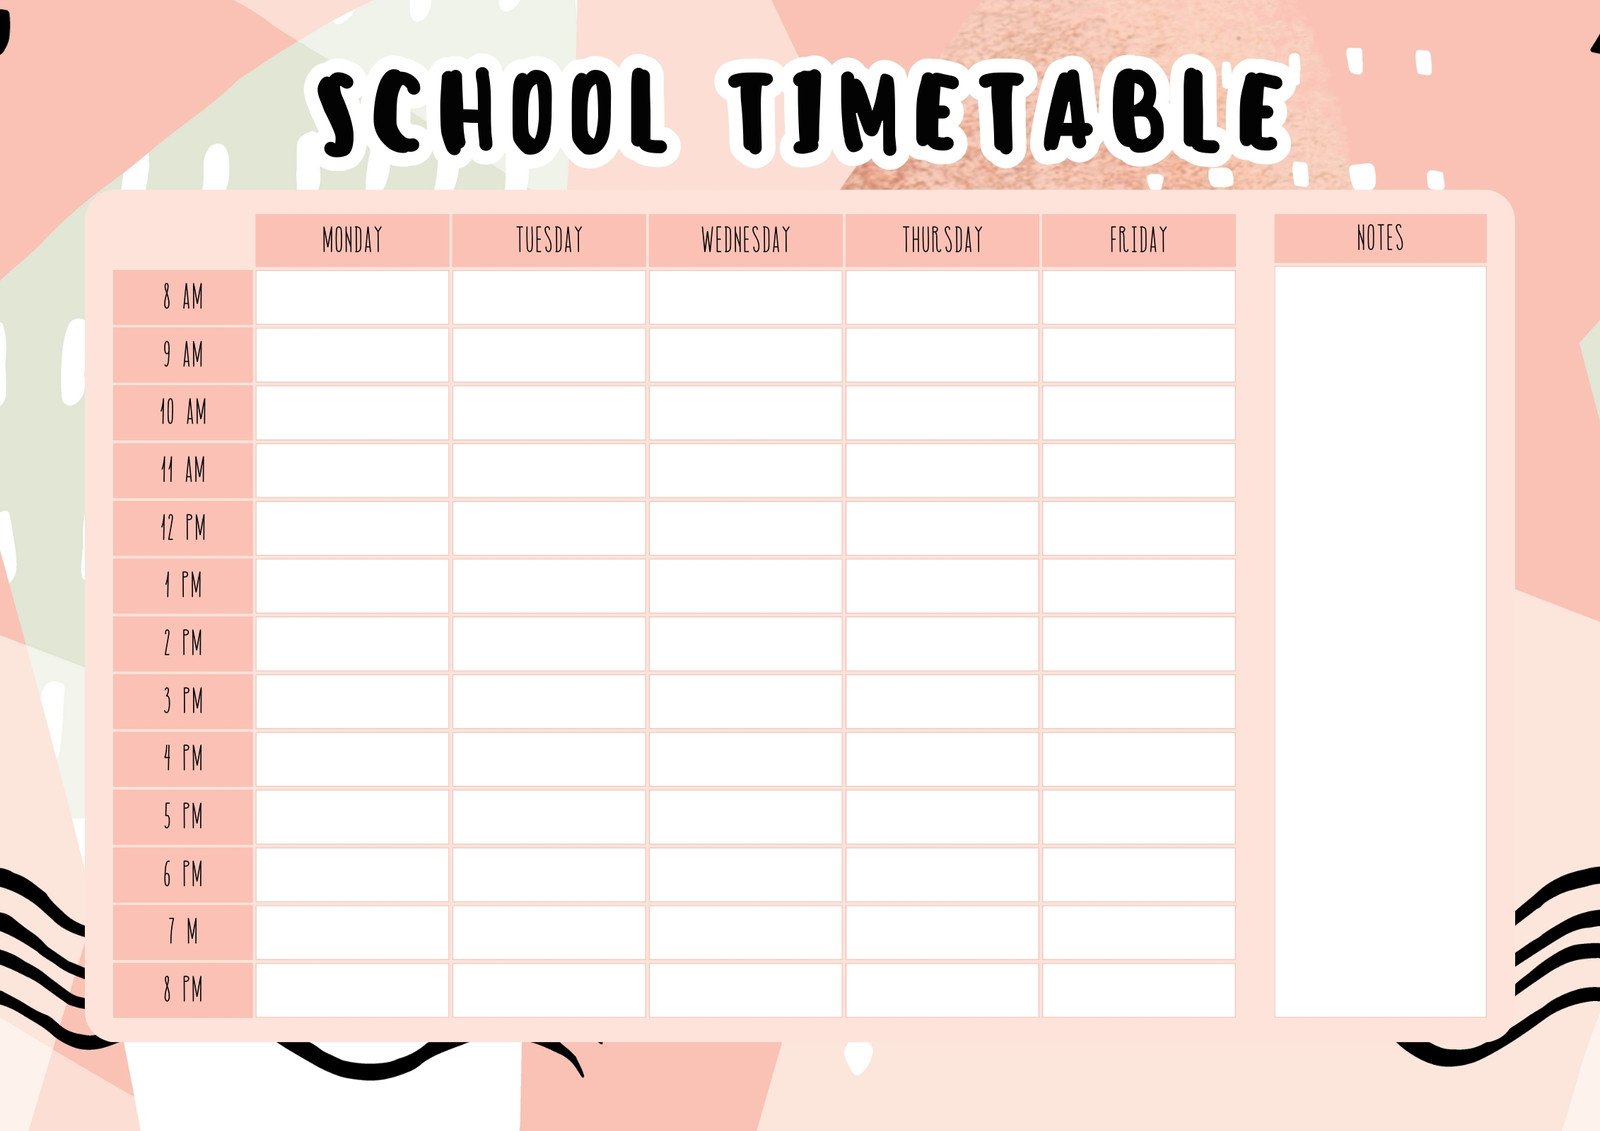 Class Schedule in Pink, Black, and Green Handdrawn Style